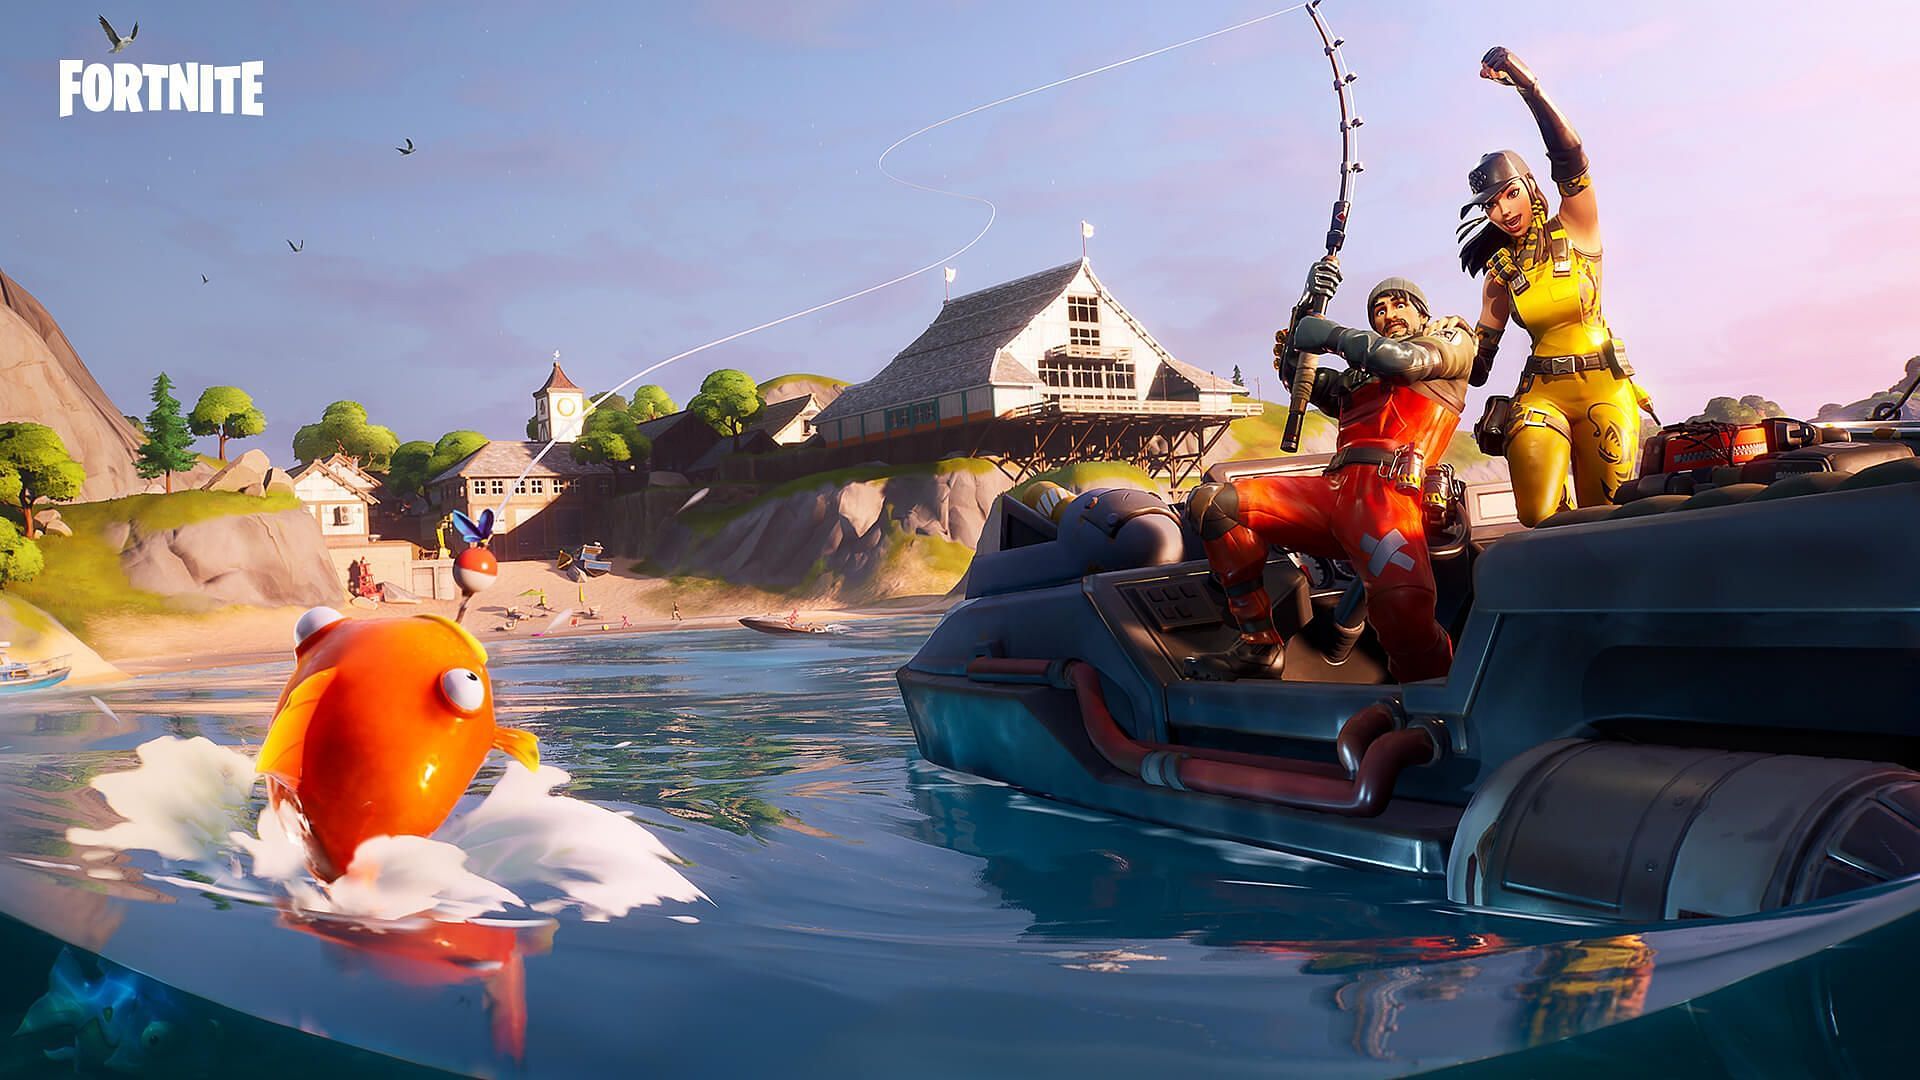 Players can either use Harpoon gun or a fishing rod to fish in Fortnite. (Image via Epic Games)